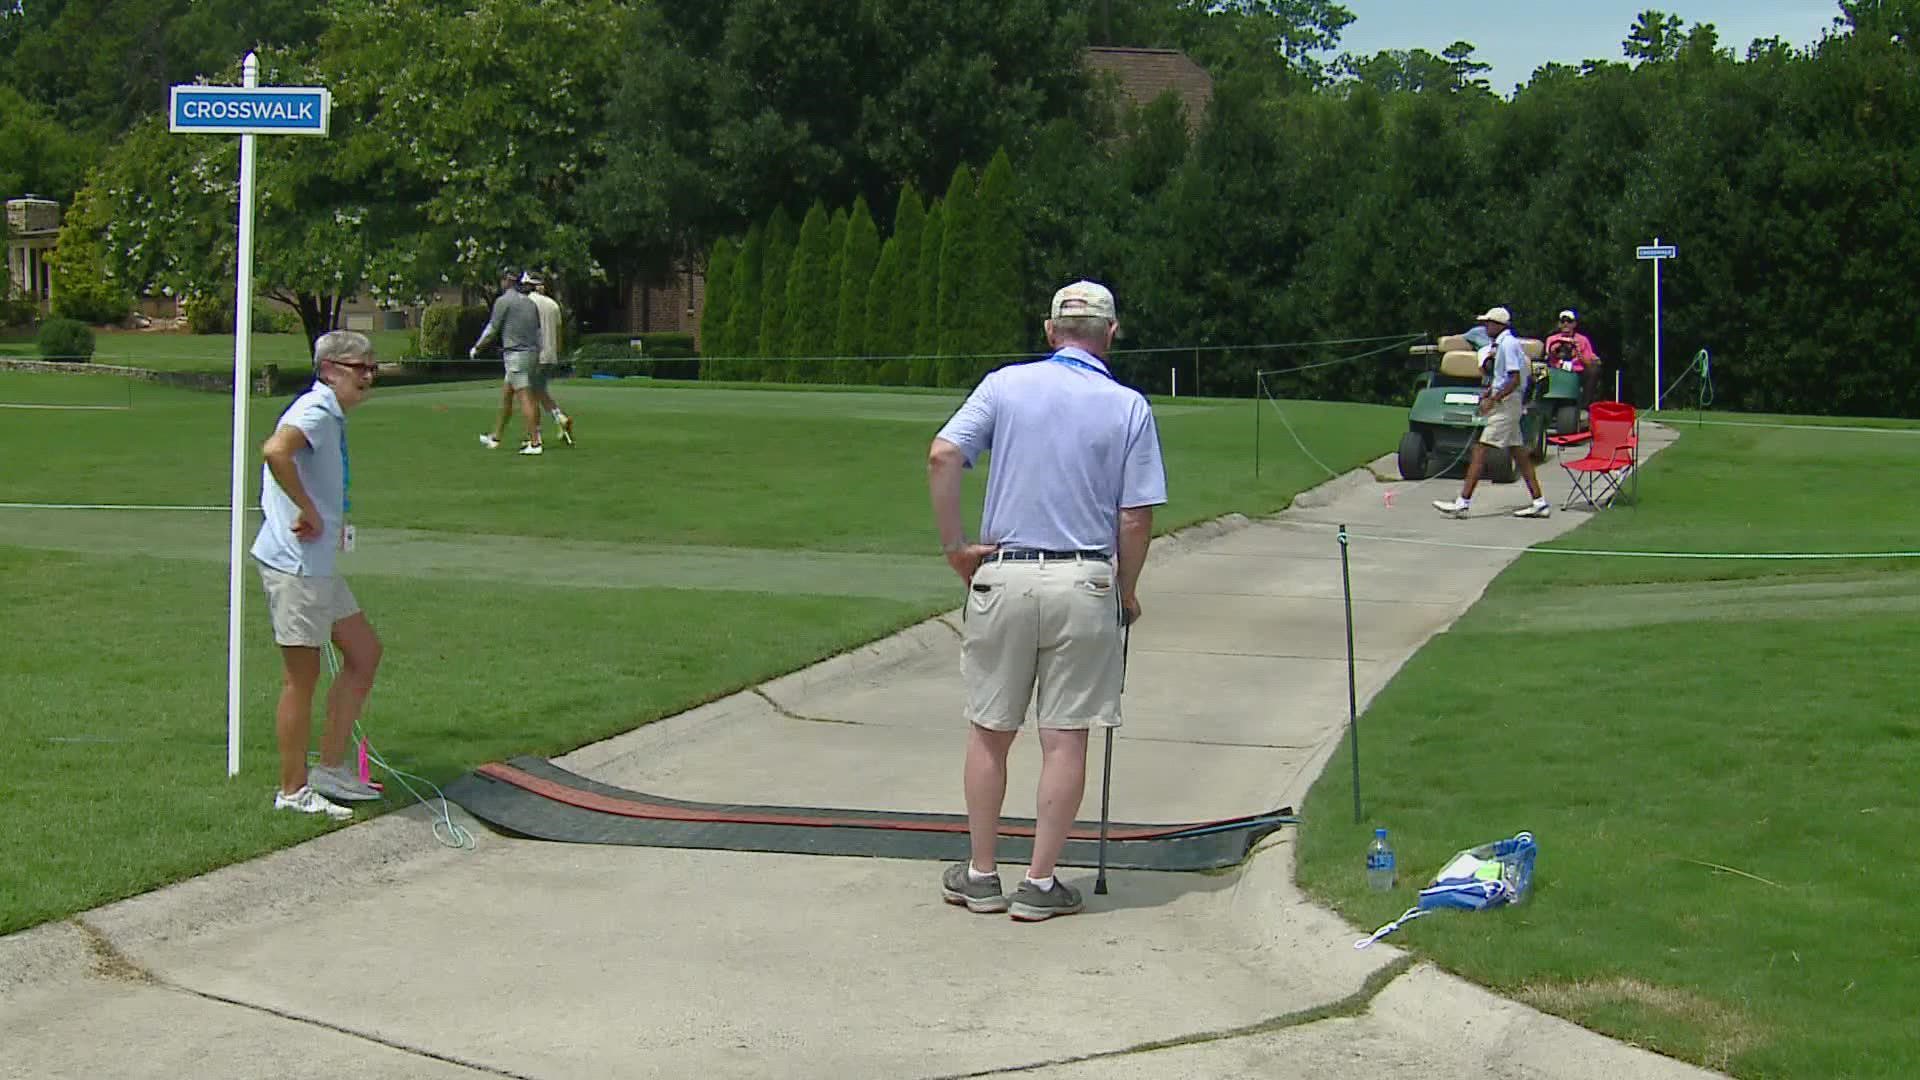 More than 2,000 volunteers were helping put on the big golf tournament at Sedgefield Country Club.